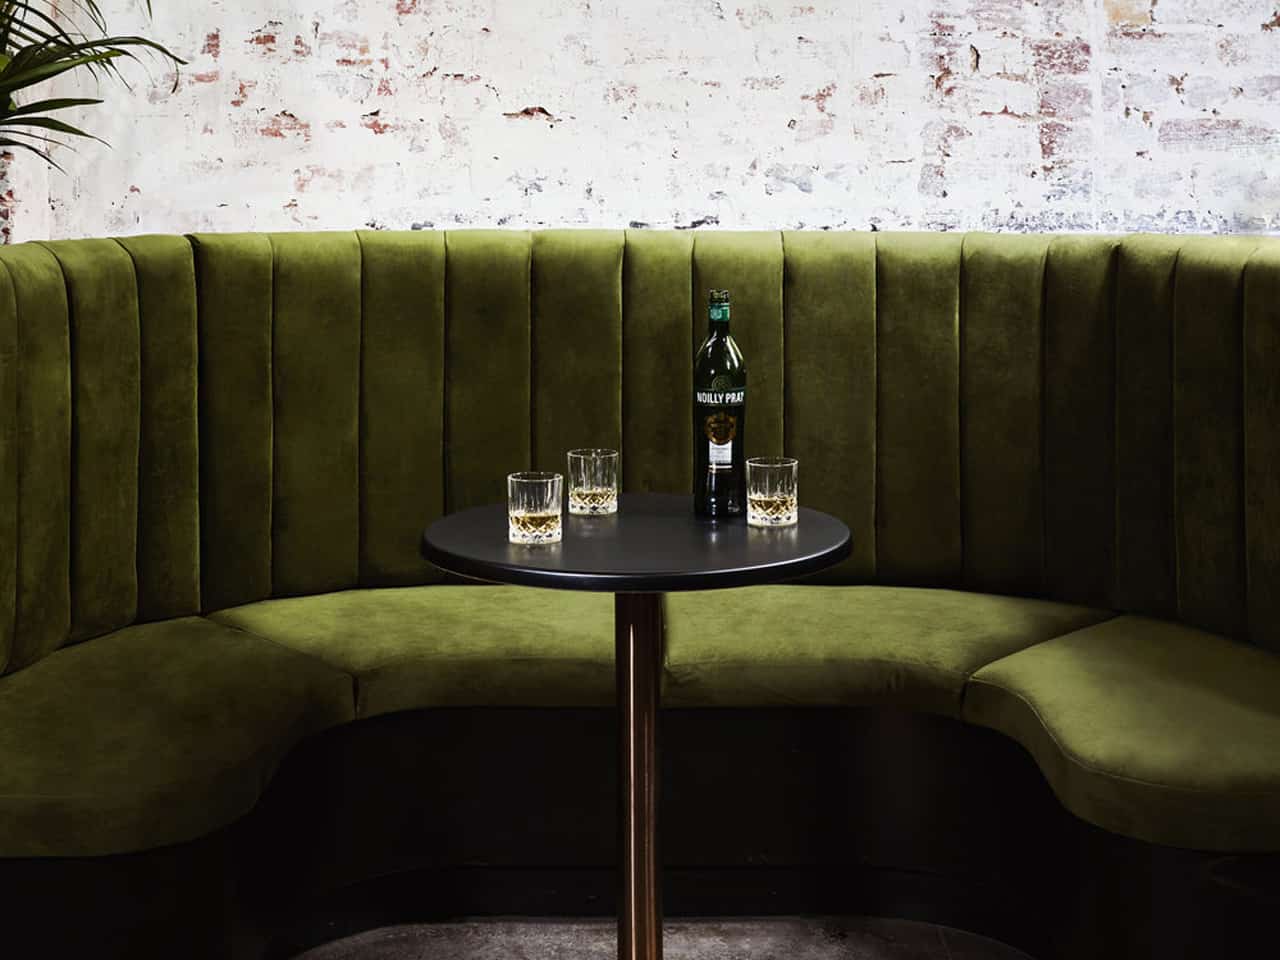 Green sofa with round table and whiskey bottle against brick white washed wall